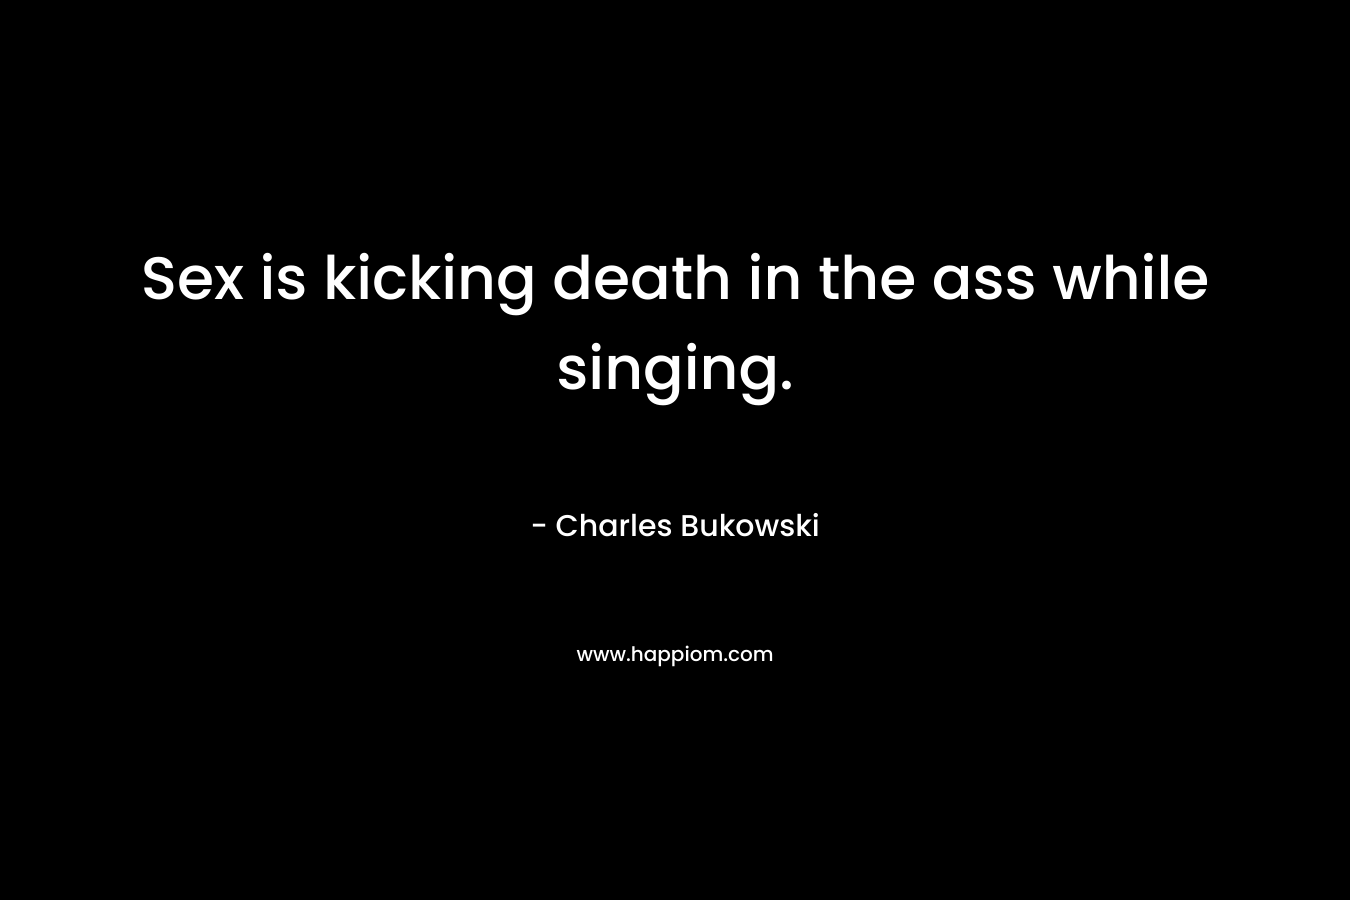 Sex is kicking death in the ass while singing. – Charles Bukowski